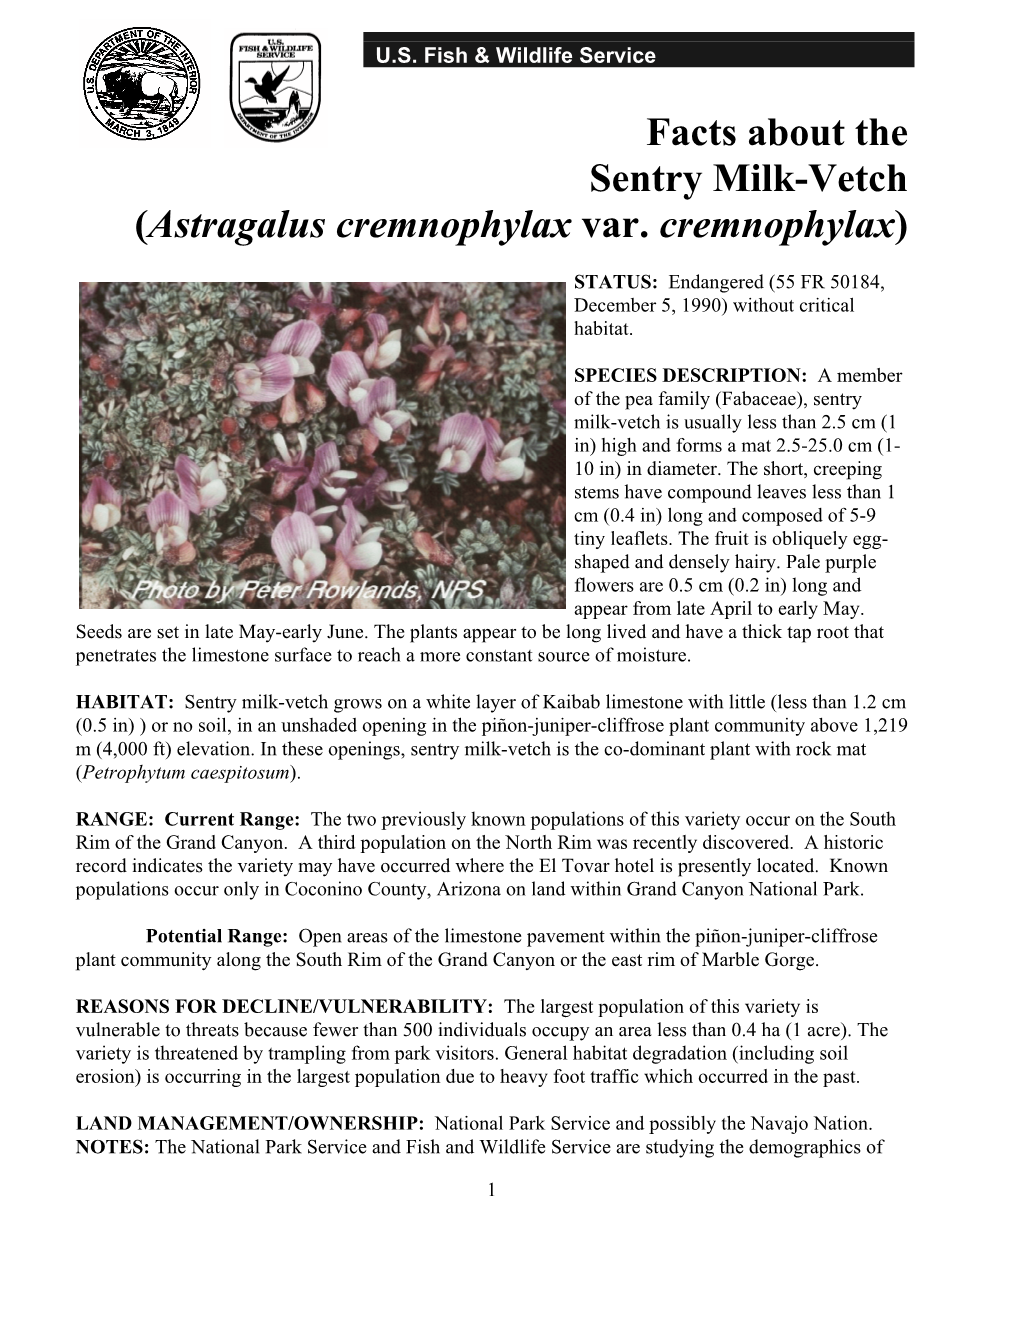 Facts About the Sentry Milk-Vetch (Astragalus Cremnophylax Var